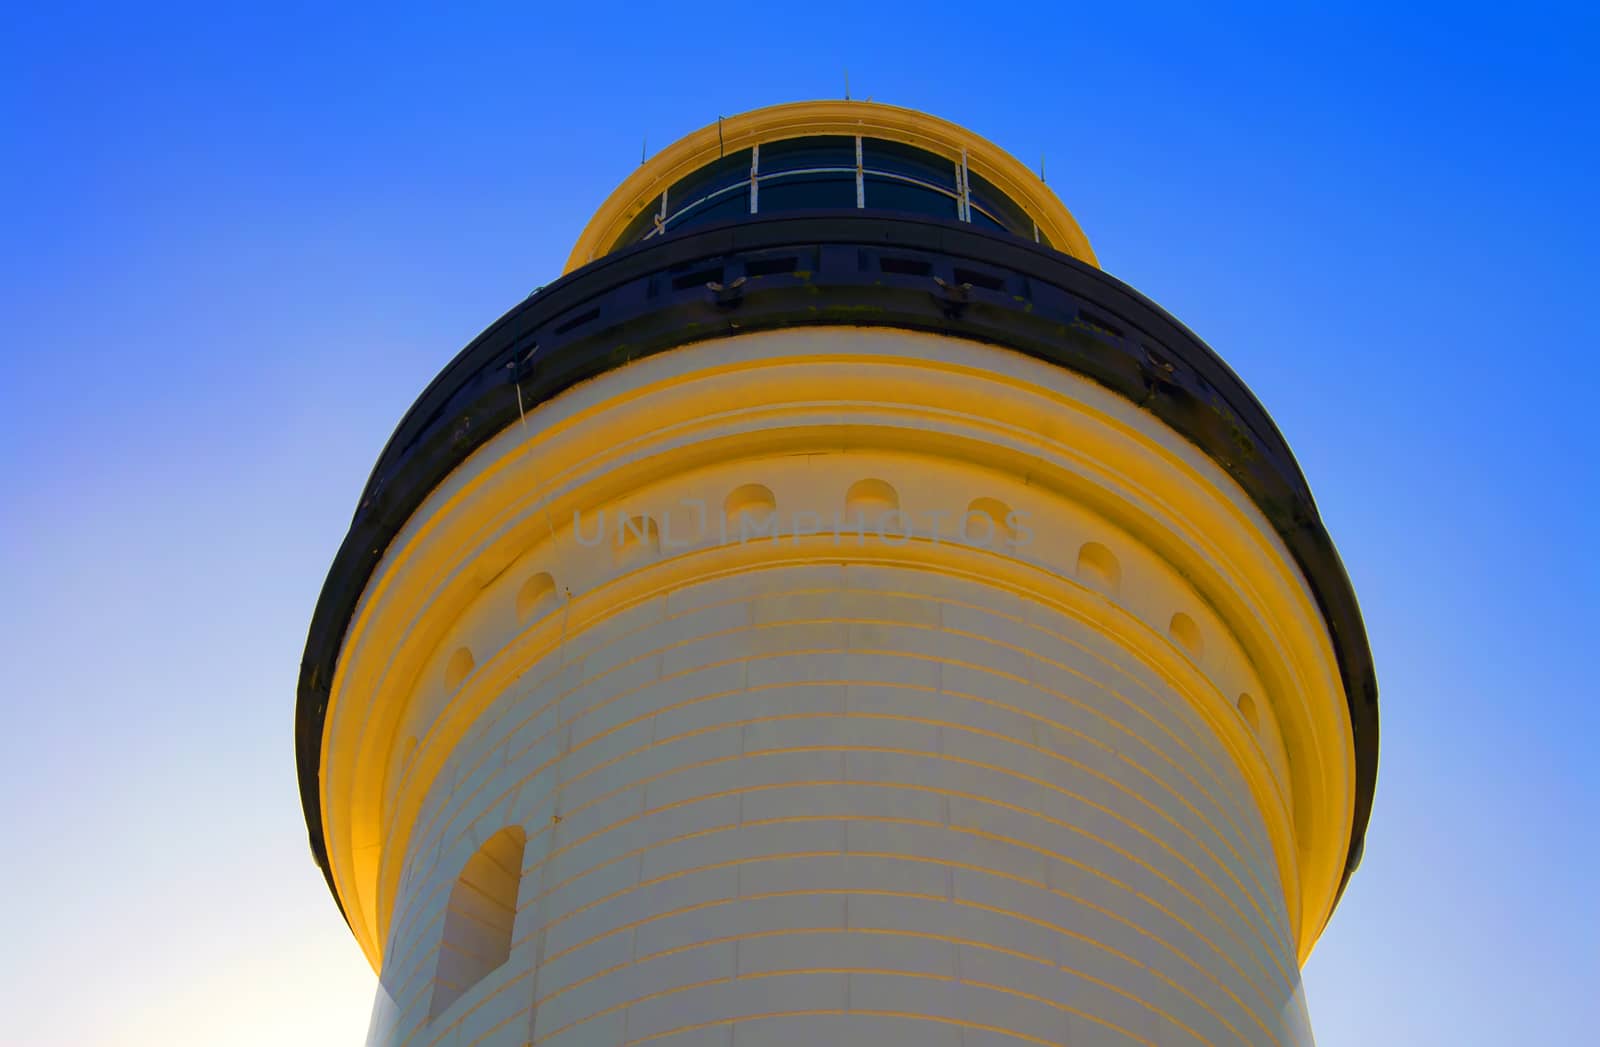 The top roof dome of a lighthouse against the sky by definitearts